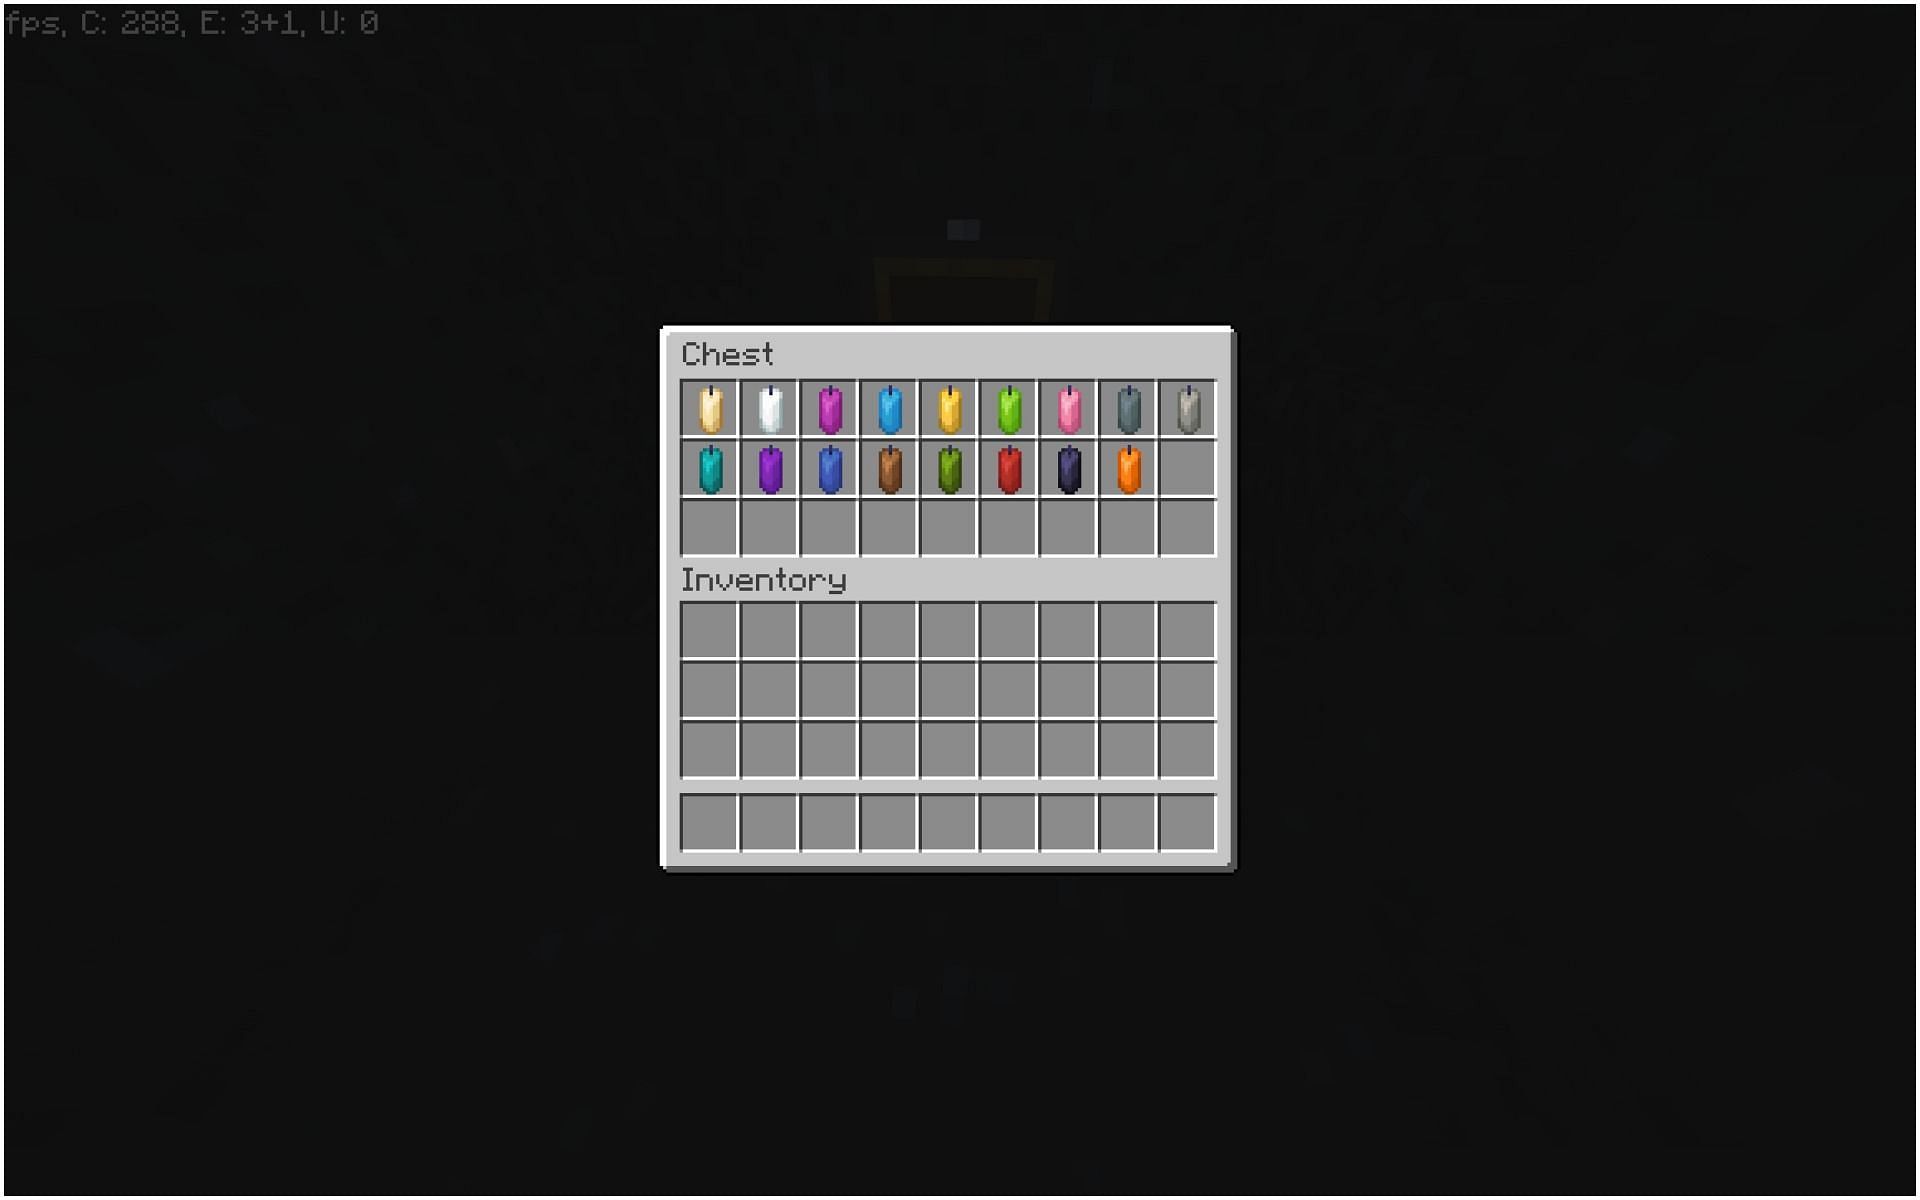 All the candles in Minecraft (Image via Minecraft)